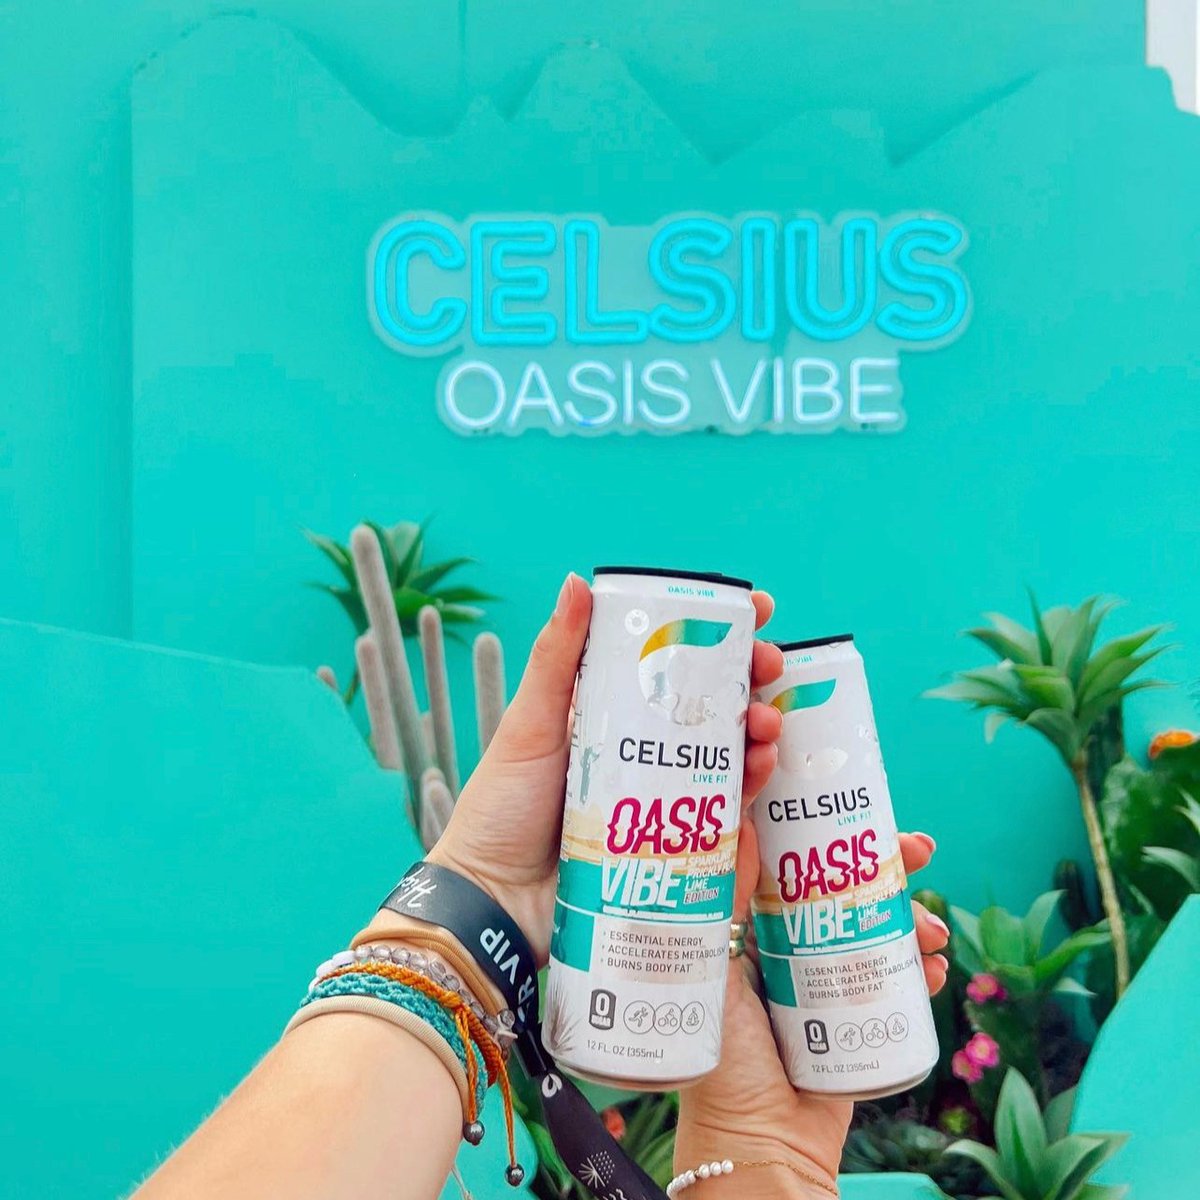 Whether you're a brand or an agency, GTC is here to support your design & concepting needs, no matter the event! 🙌🏼✨ CELSIUS Oasis Vibe Tour Pop-Up - Design: GTC, Fab/Install: Sunami Fabrication 
#experientialdesign #eventdesign #popupdesign #celsius #goodtimecreative